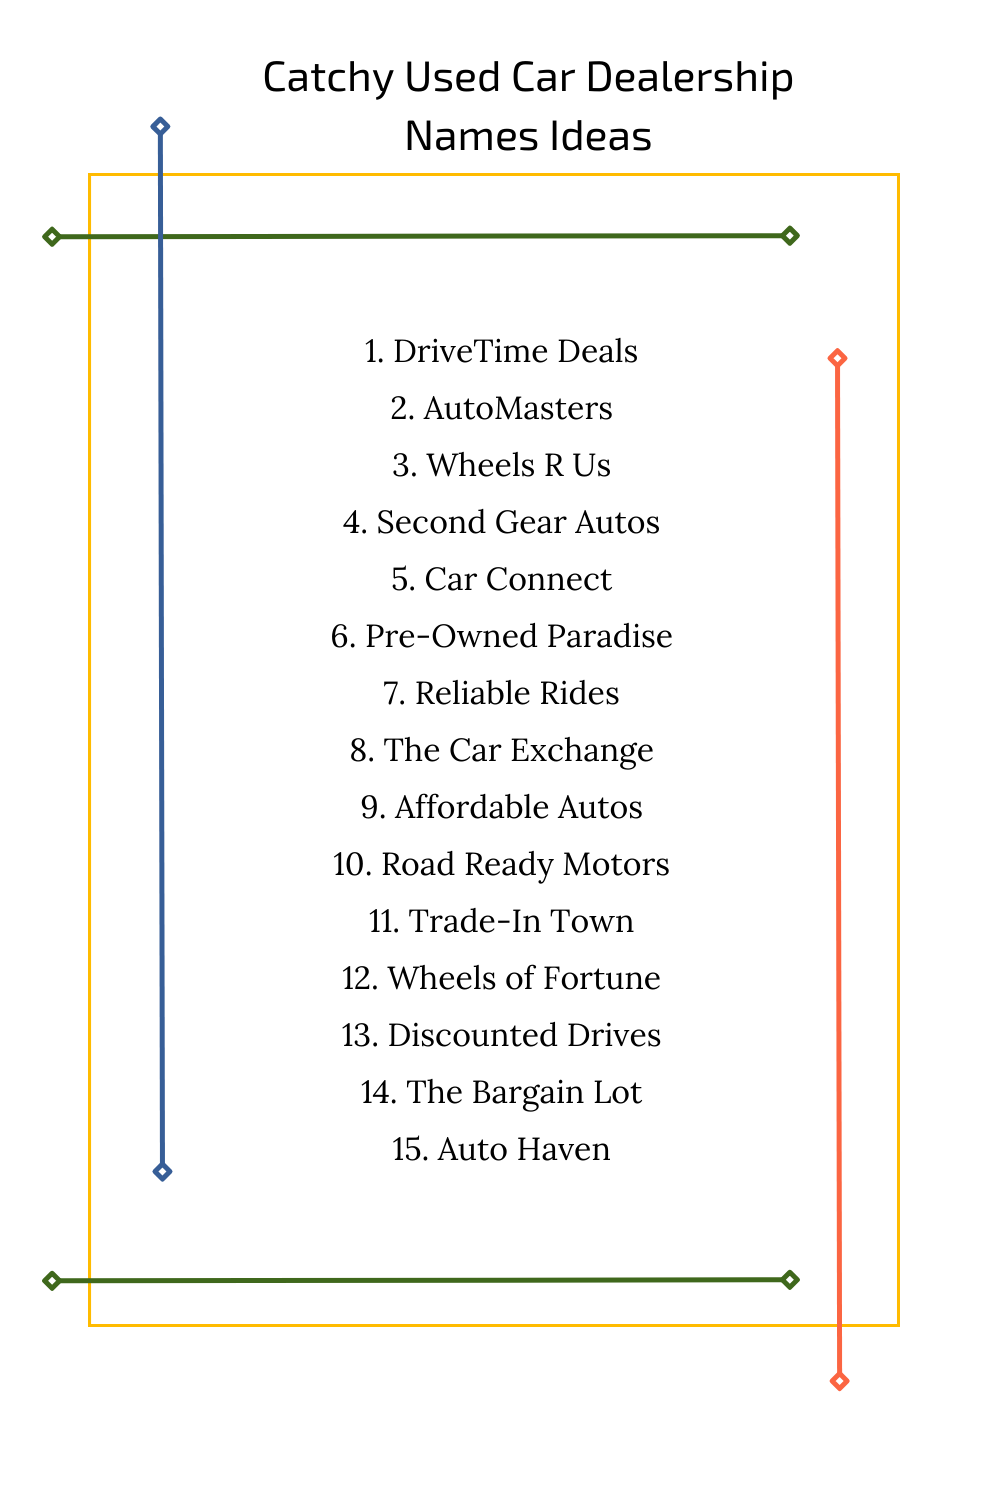 Catchy Used Car Dealership Names Ideas